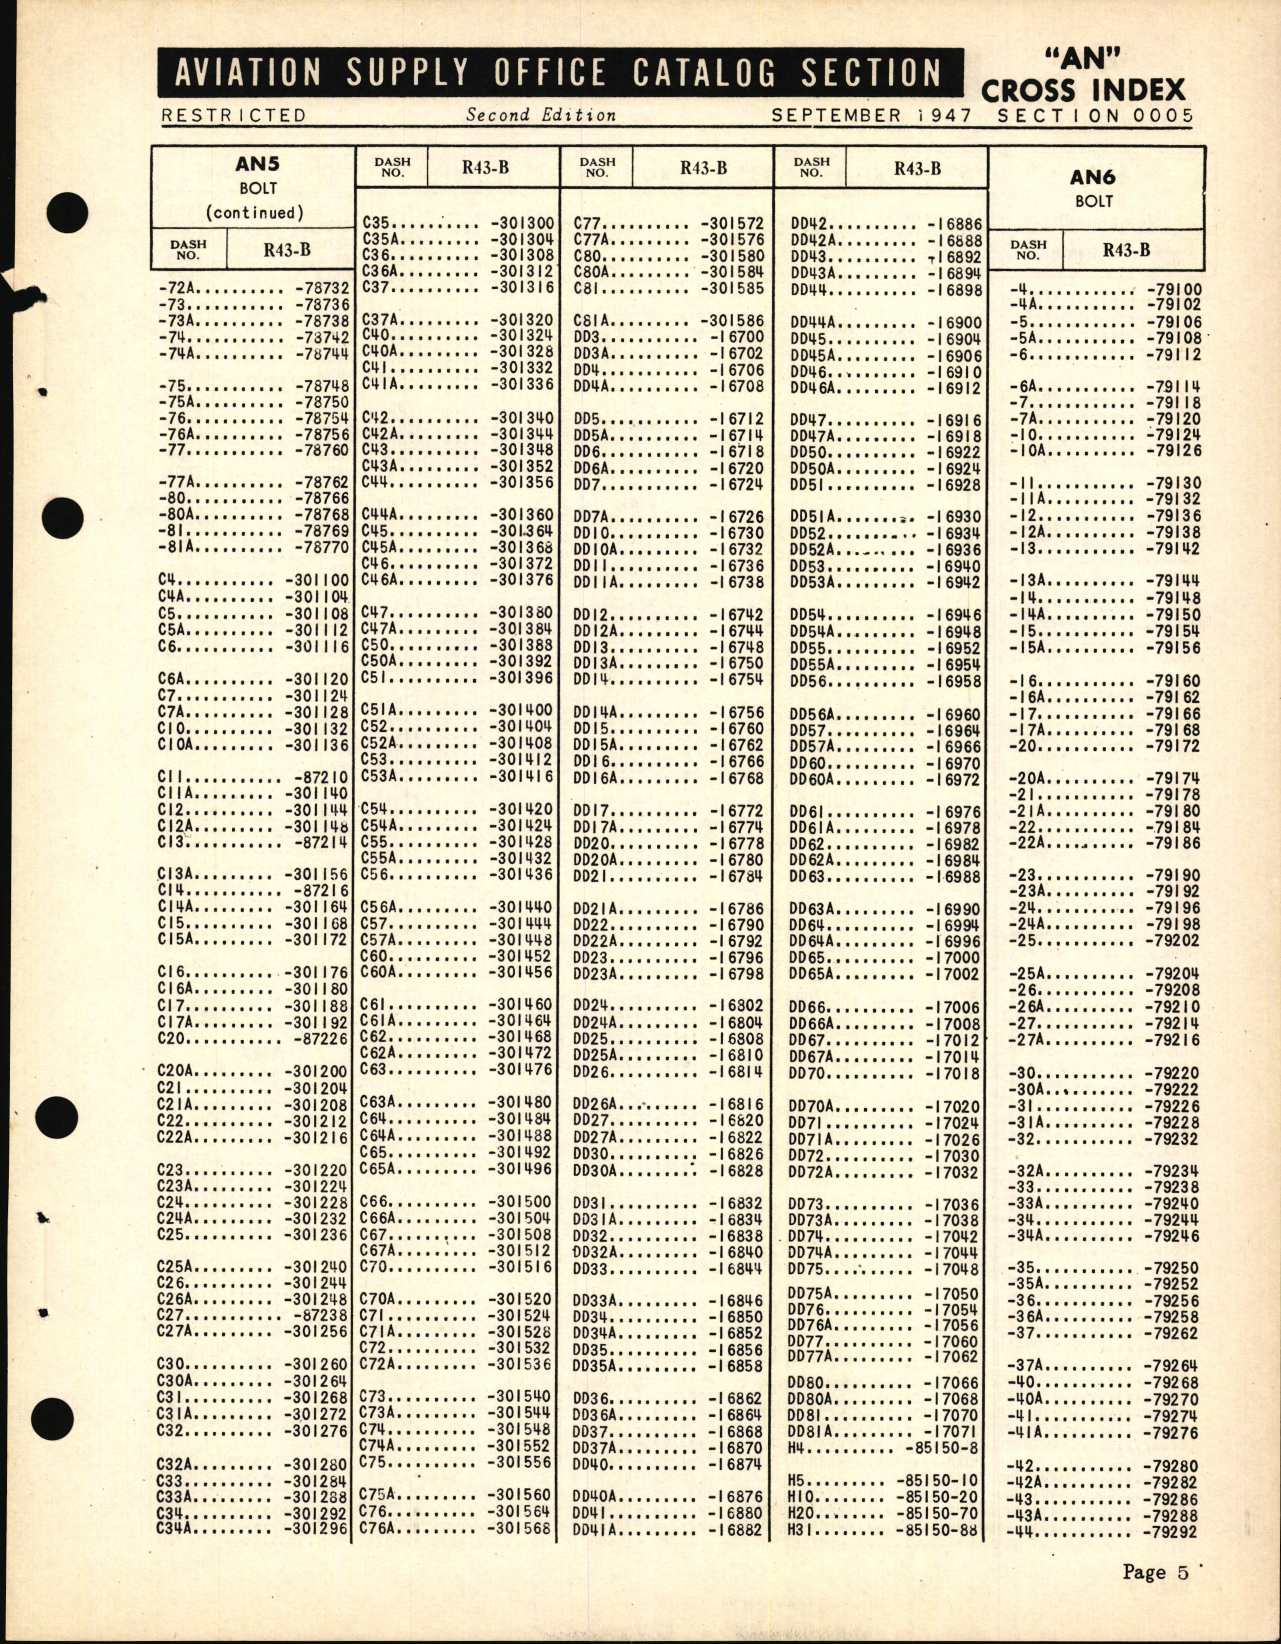 Sample page 5 from AirCorps Library document: Cross Index of 